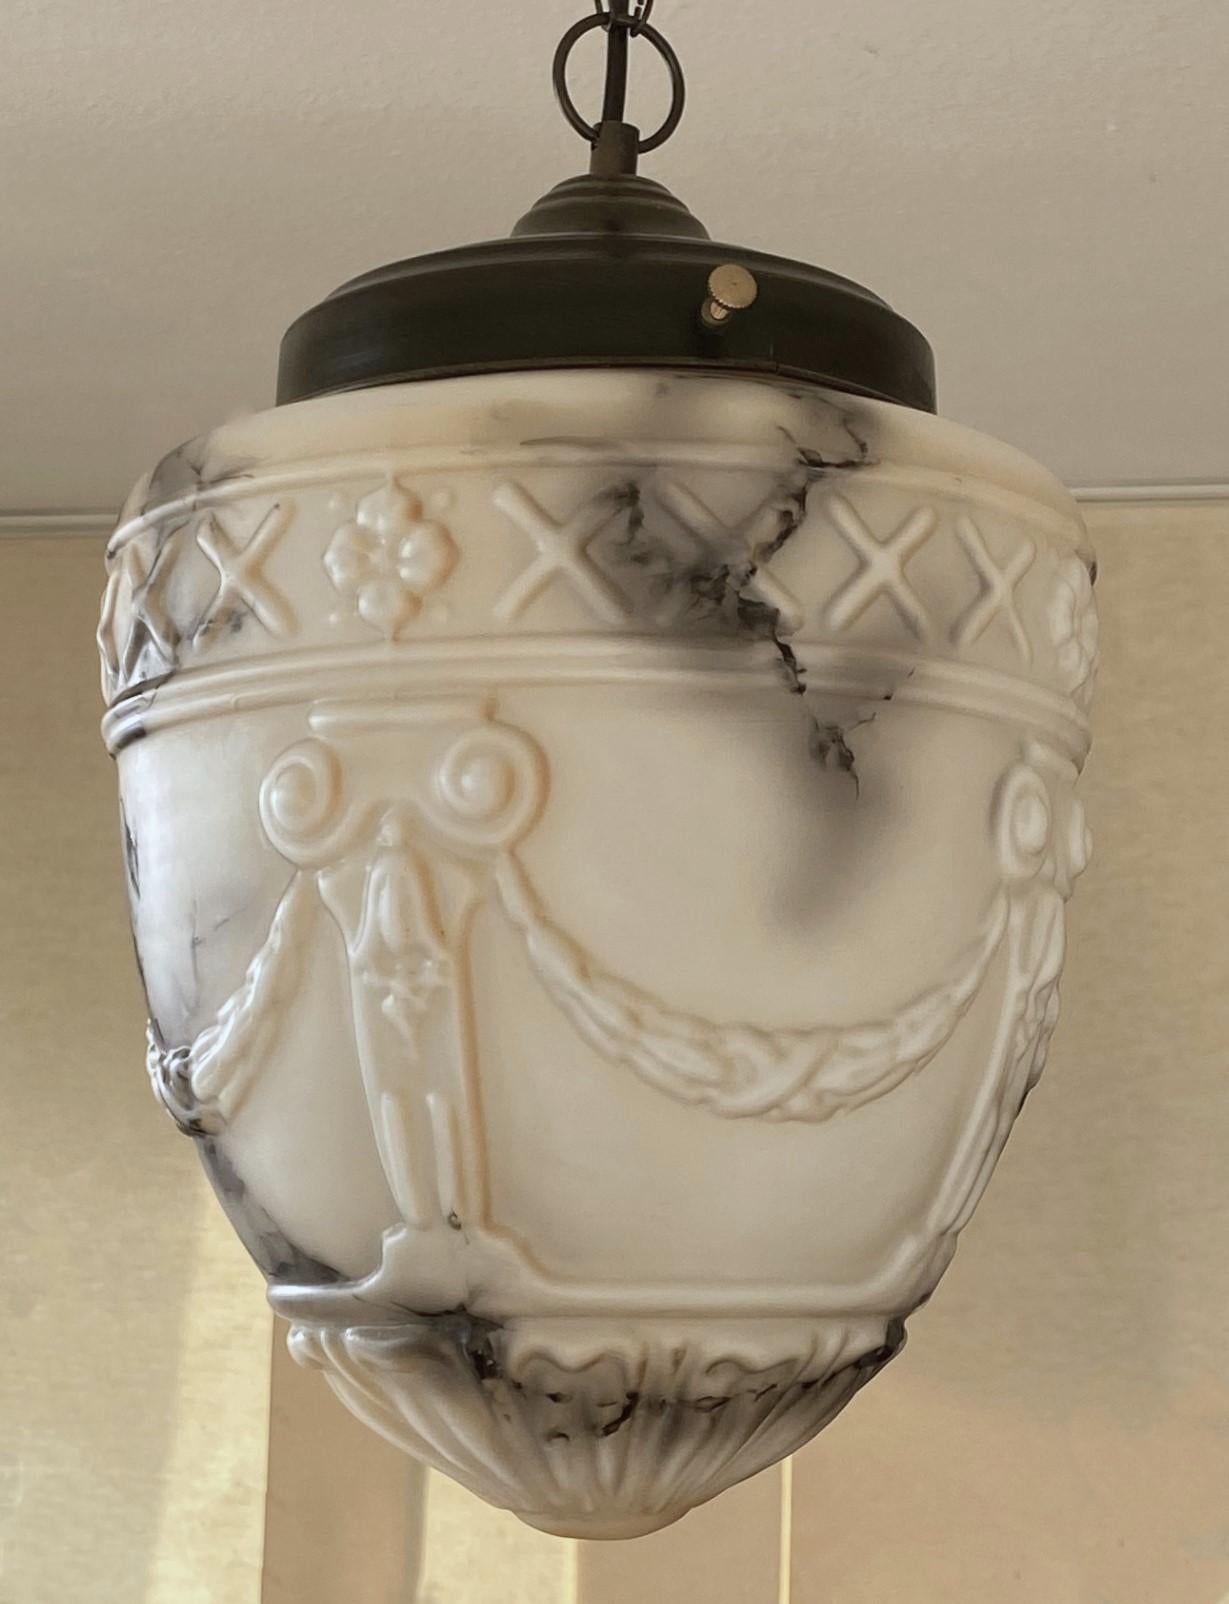 20th Century French Art Deco Alabaster Looking High-Releaf Glass Pendant Lantern, 1920-1930 For Sale